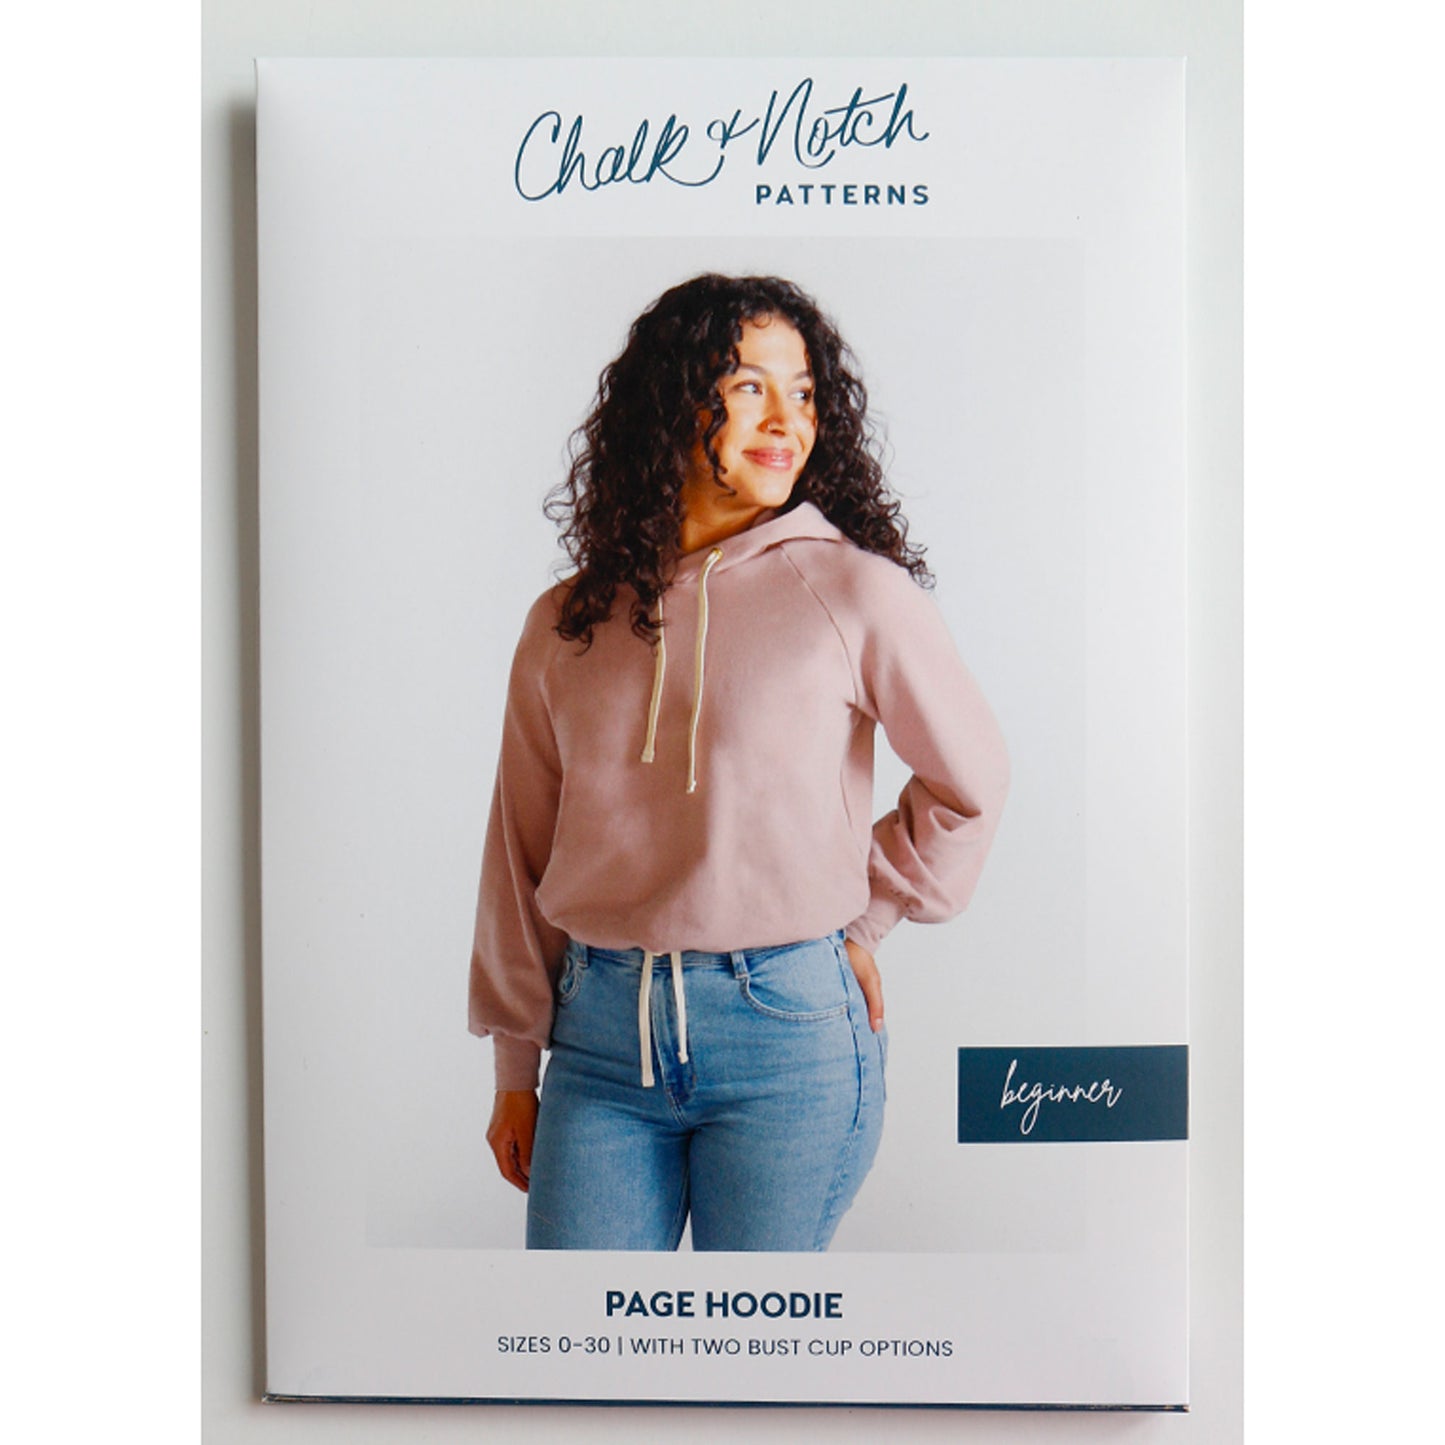 Page Hoodie Sewing Pattern - Chalk and Notch